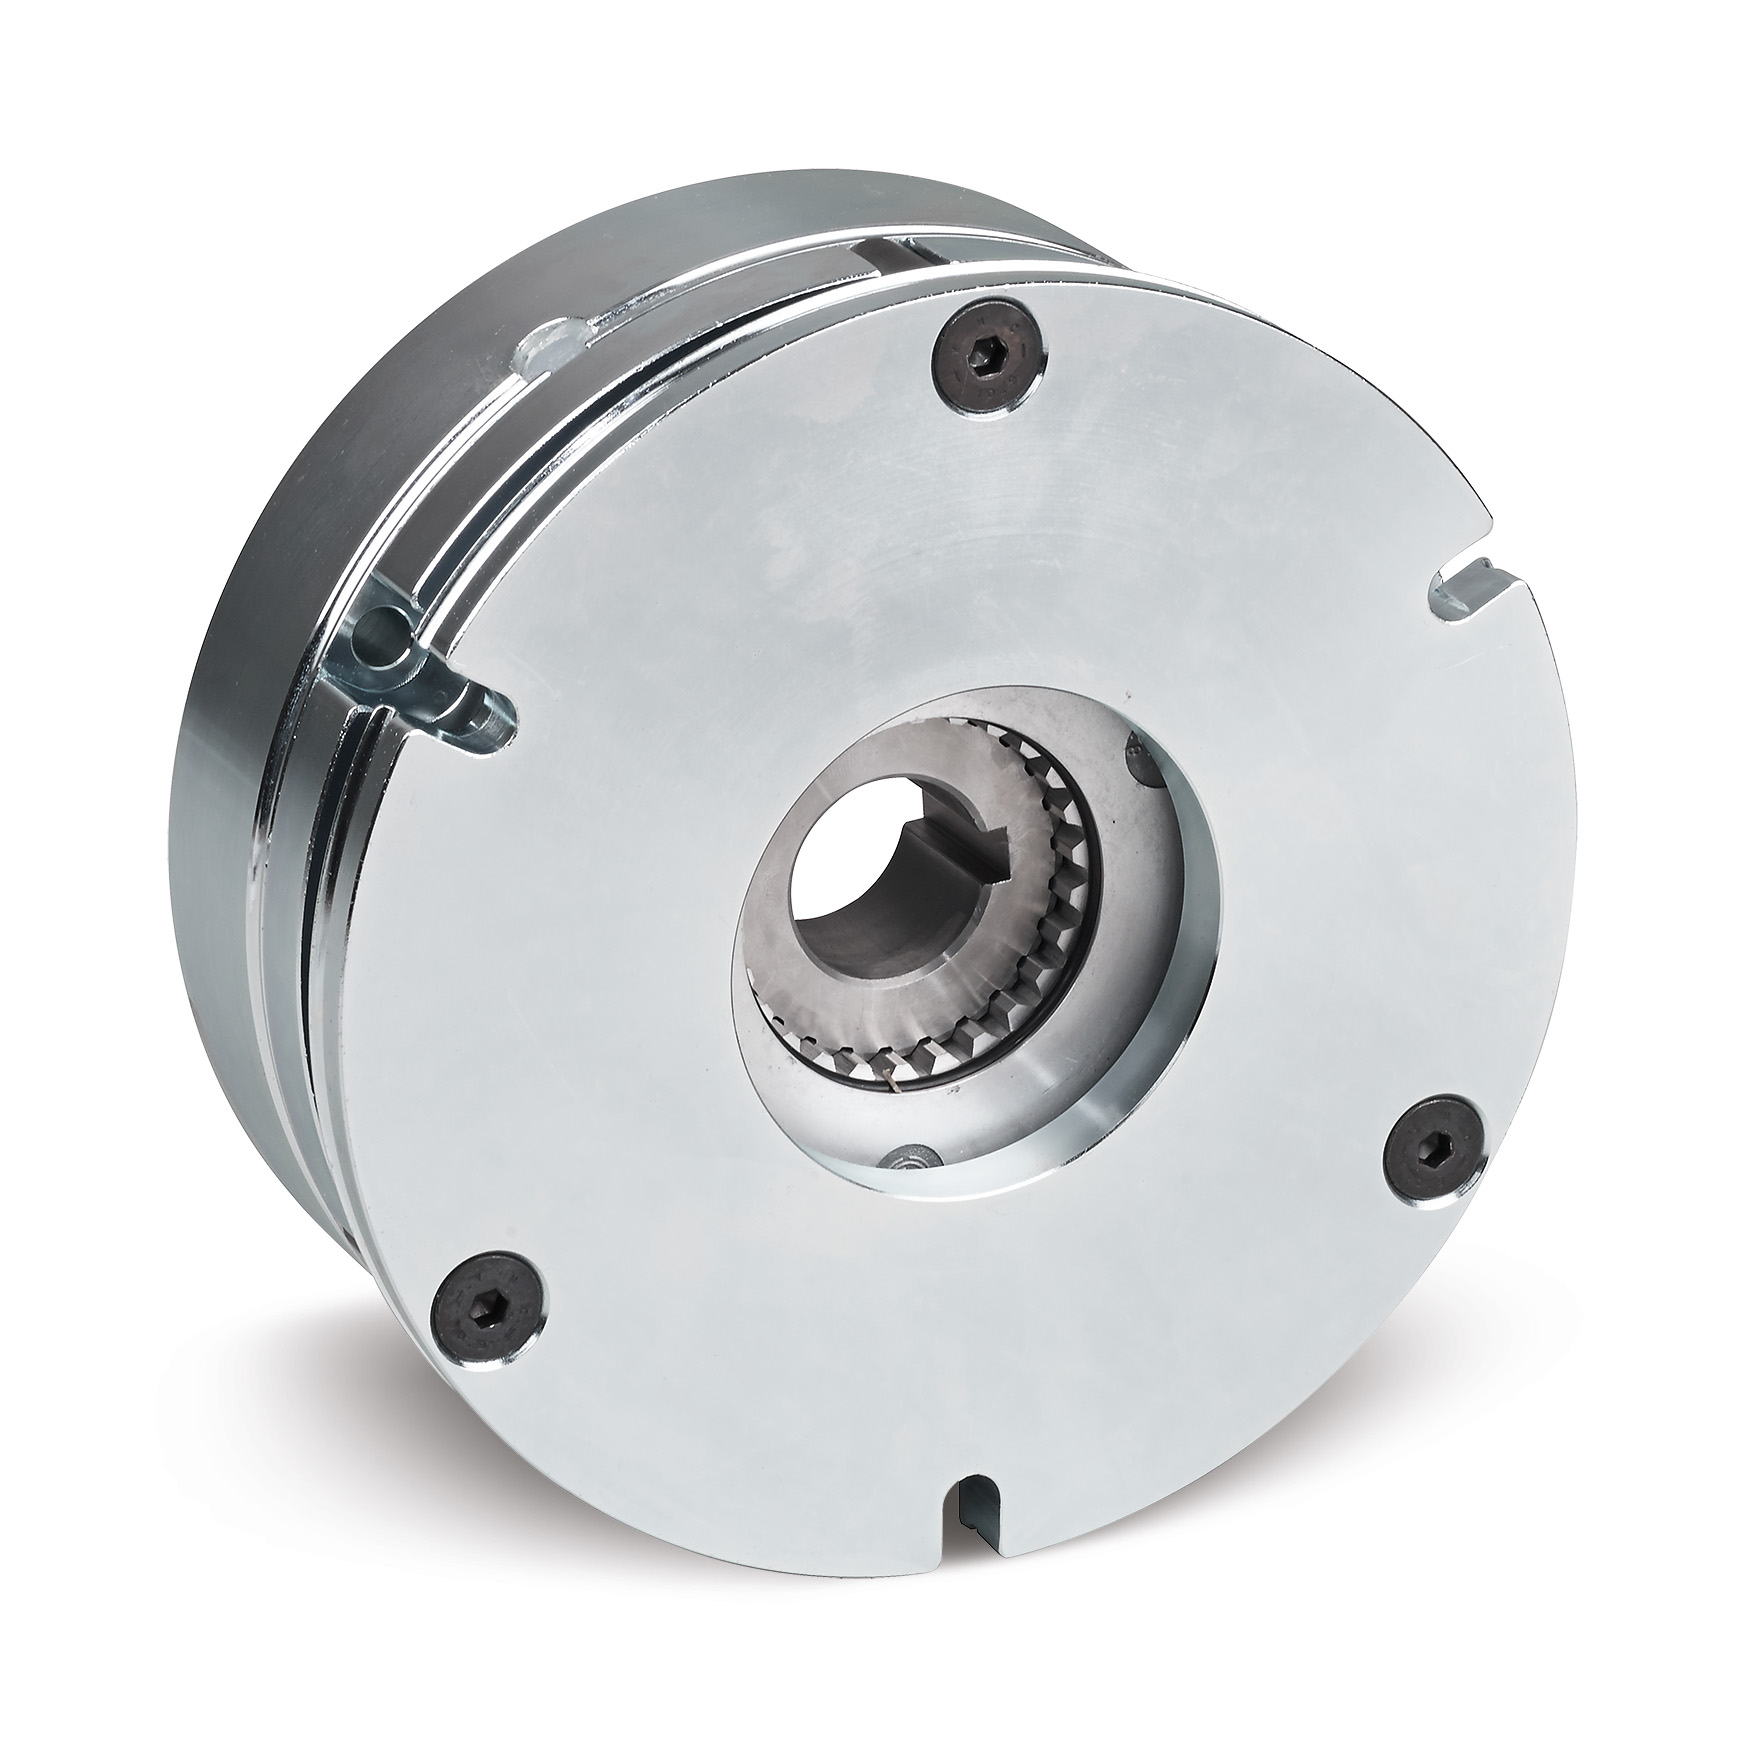 A popular selection for forklift trucks, power dense PK brakes are available with an enclosed design, ideal for applications where the brake may be exposed to moisture.